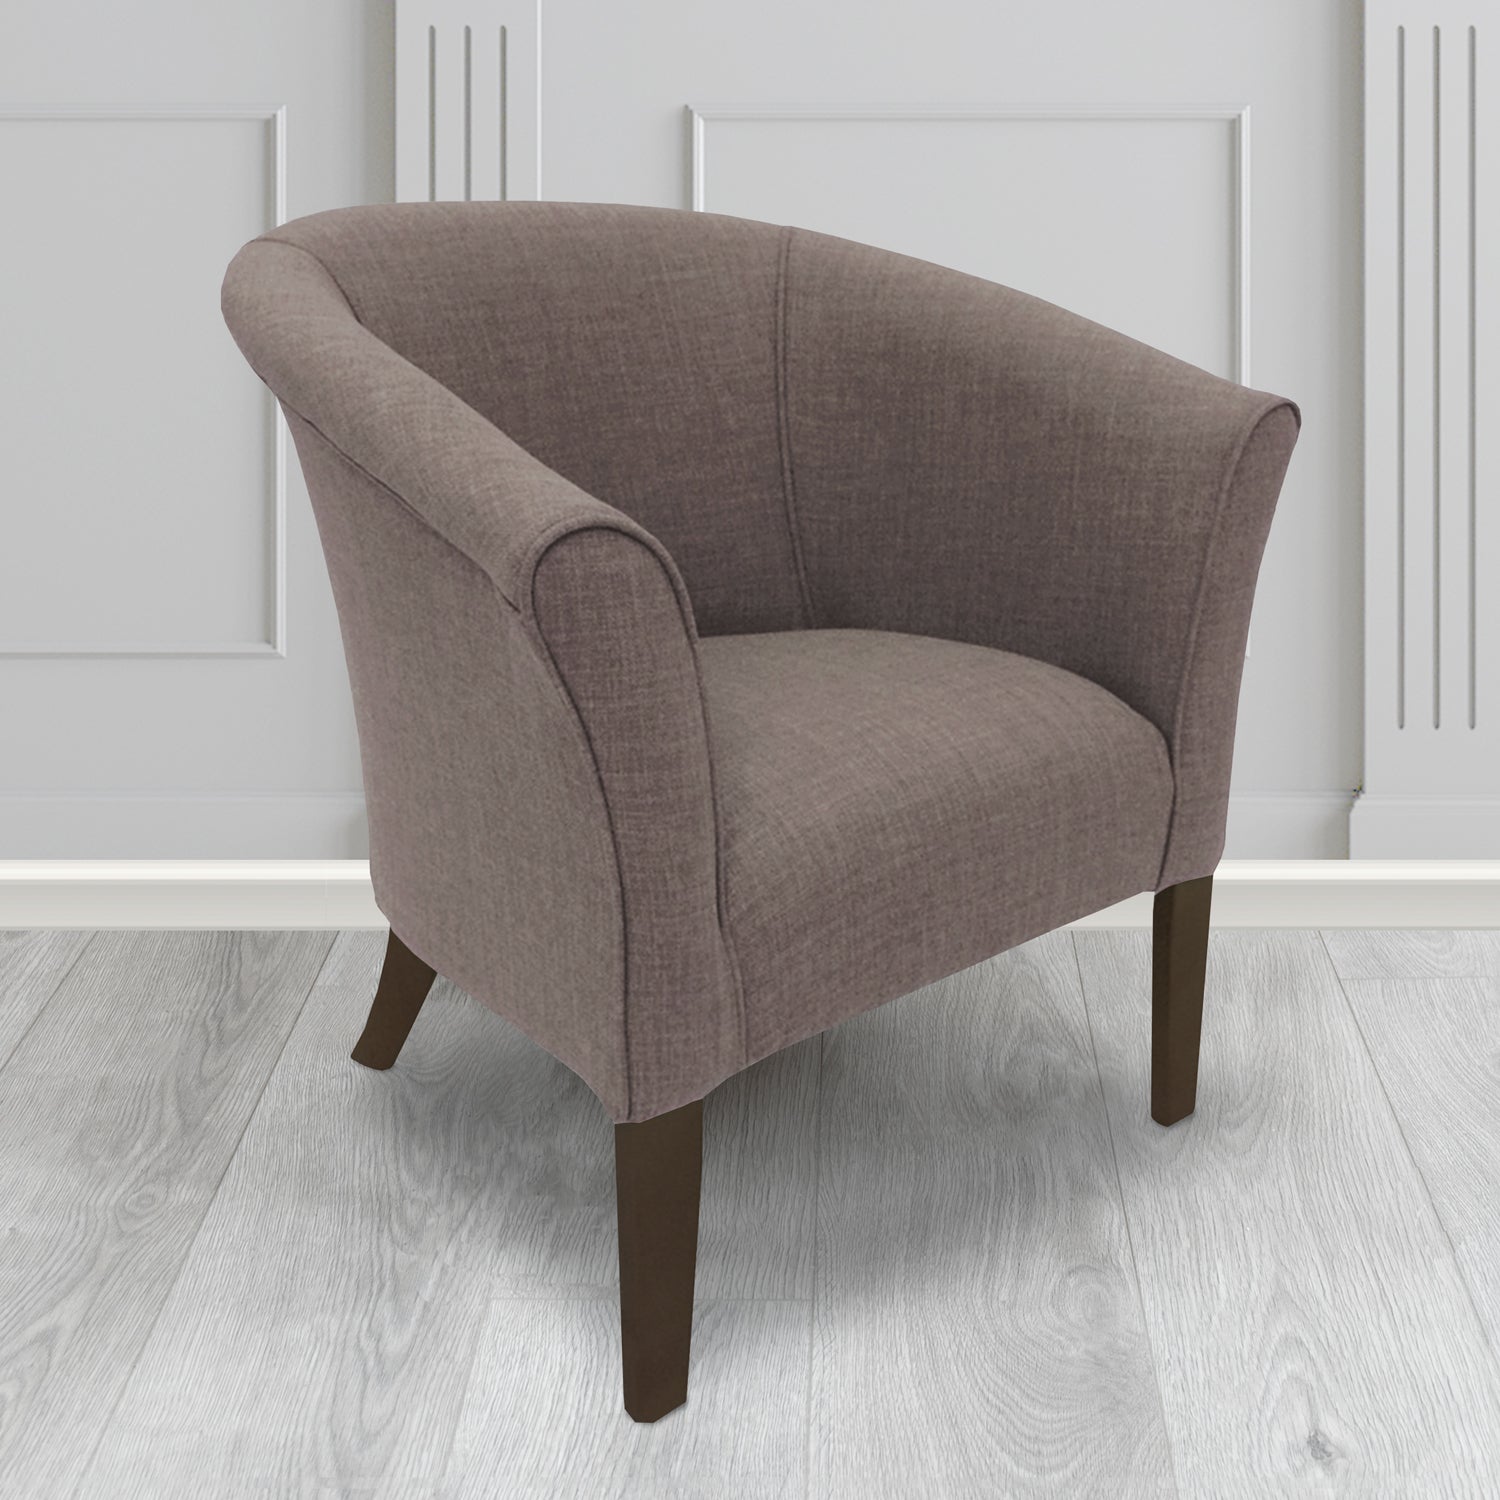 Quill Tub Chair in Linetta Steel Crib 5 Plain Fabric - Antimicrobial, Stain Resistant & Waterproof - The Tub Chair Shop